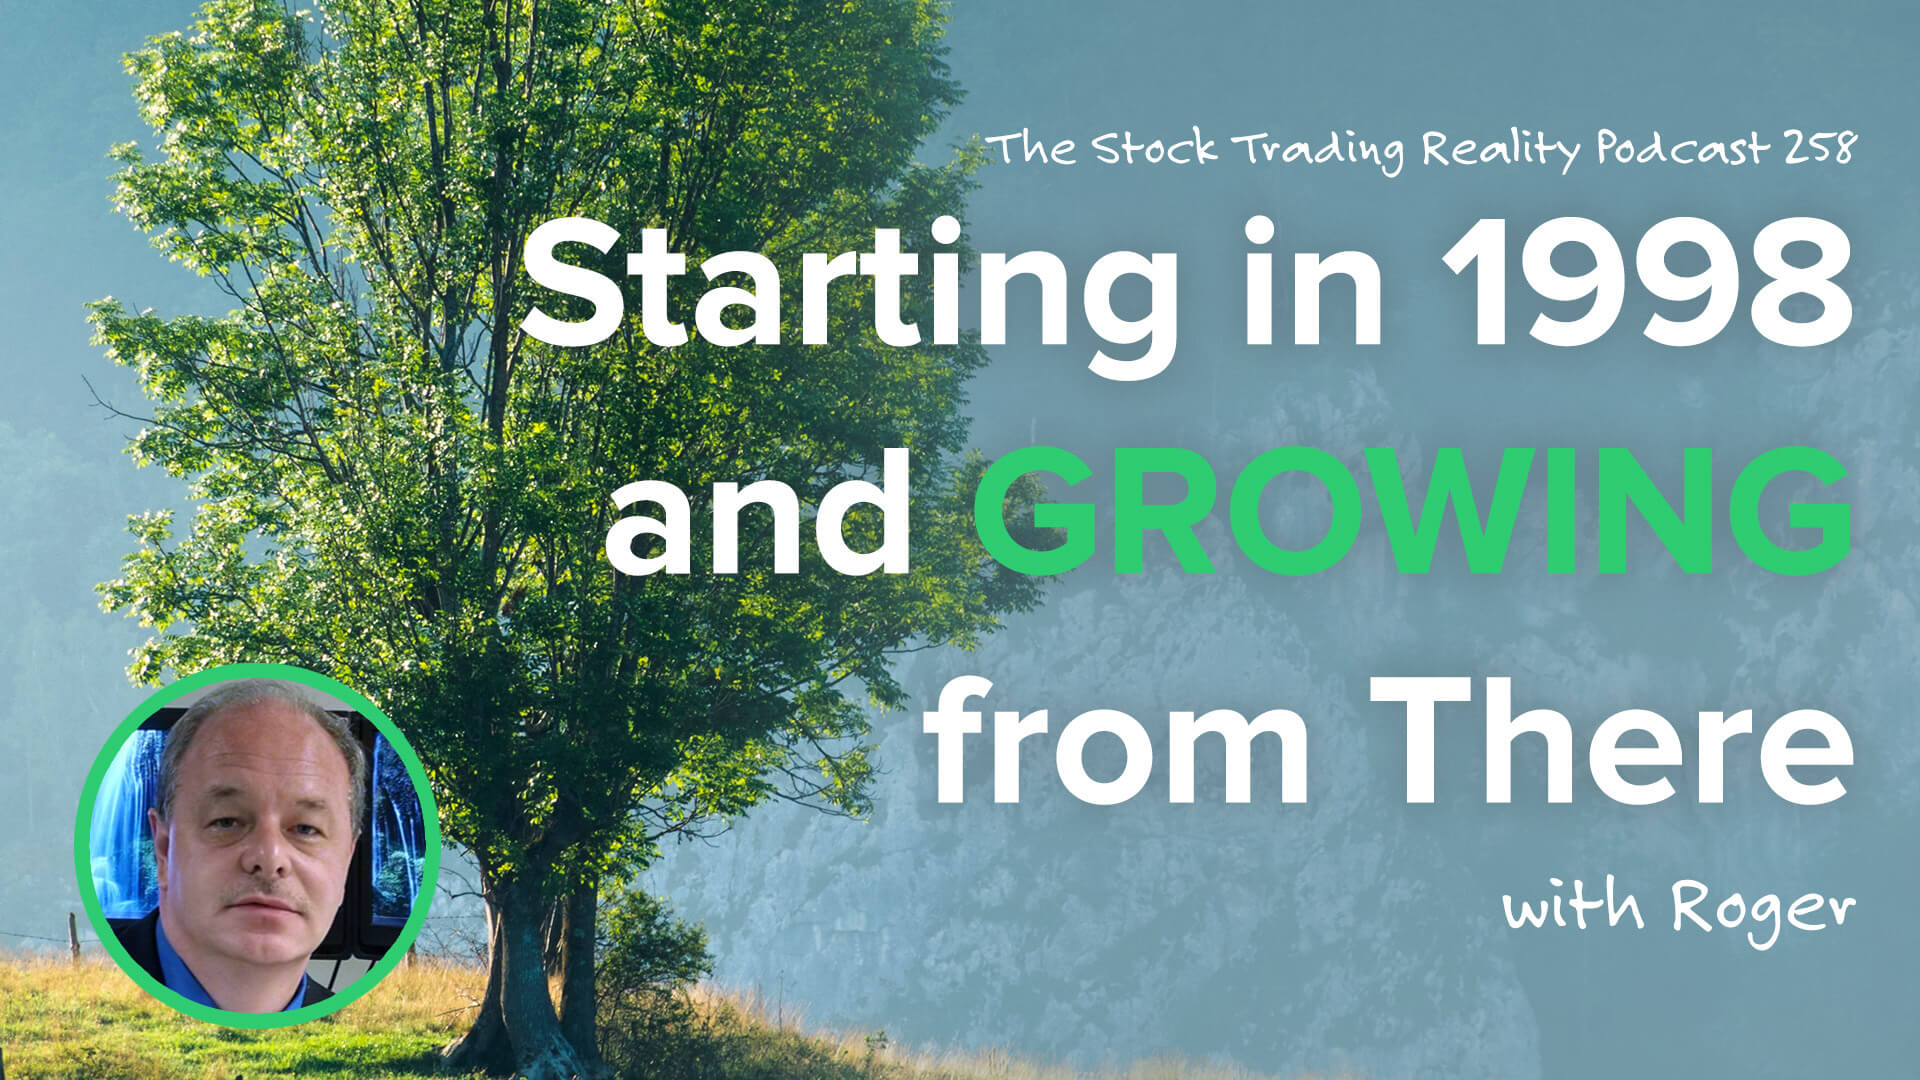 STR 258: Starting in 1998 and Growing from There